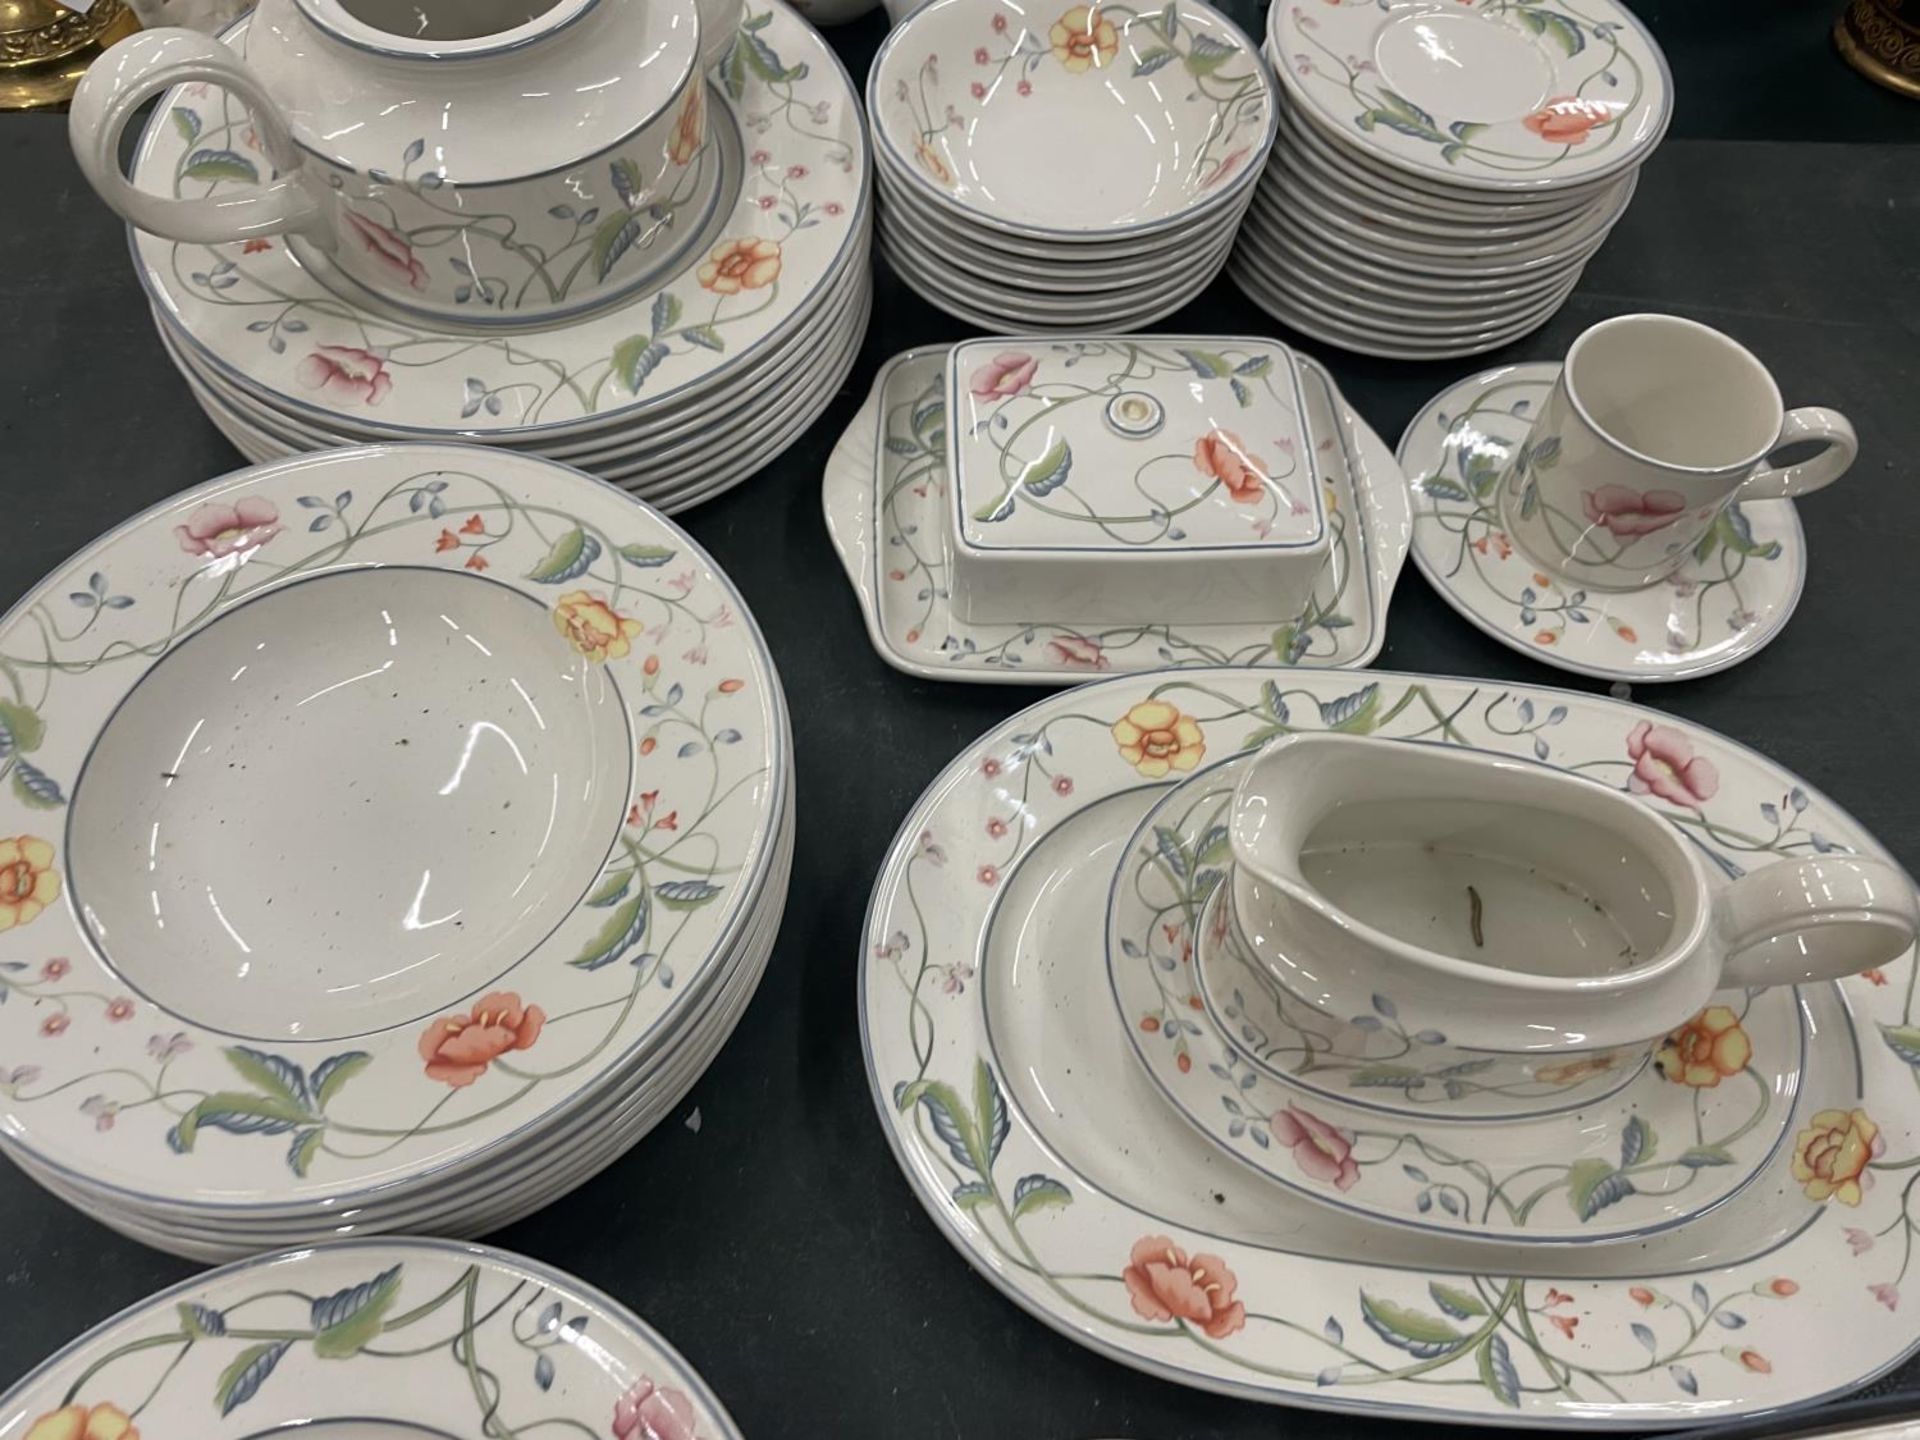 VARIOUS VILLEROY AND BOSH ALBERTINA DINNERWARE ITEMS TO INCLUDE BOWLS, PLATES, DISHES, FORKS, - Image 6 of 8